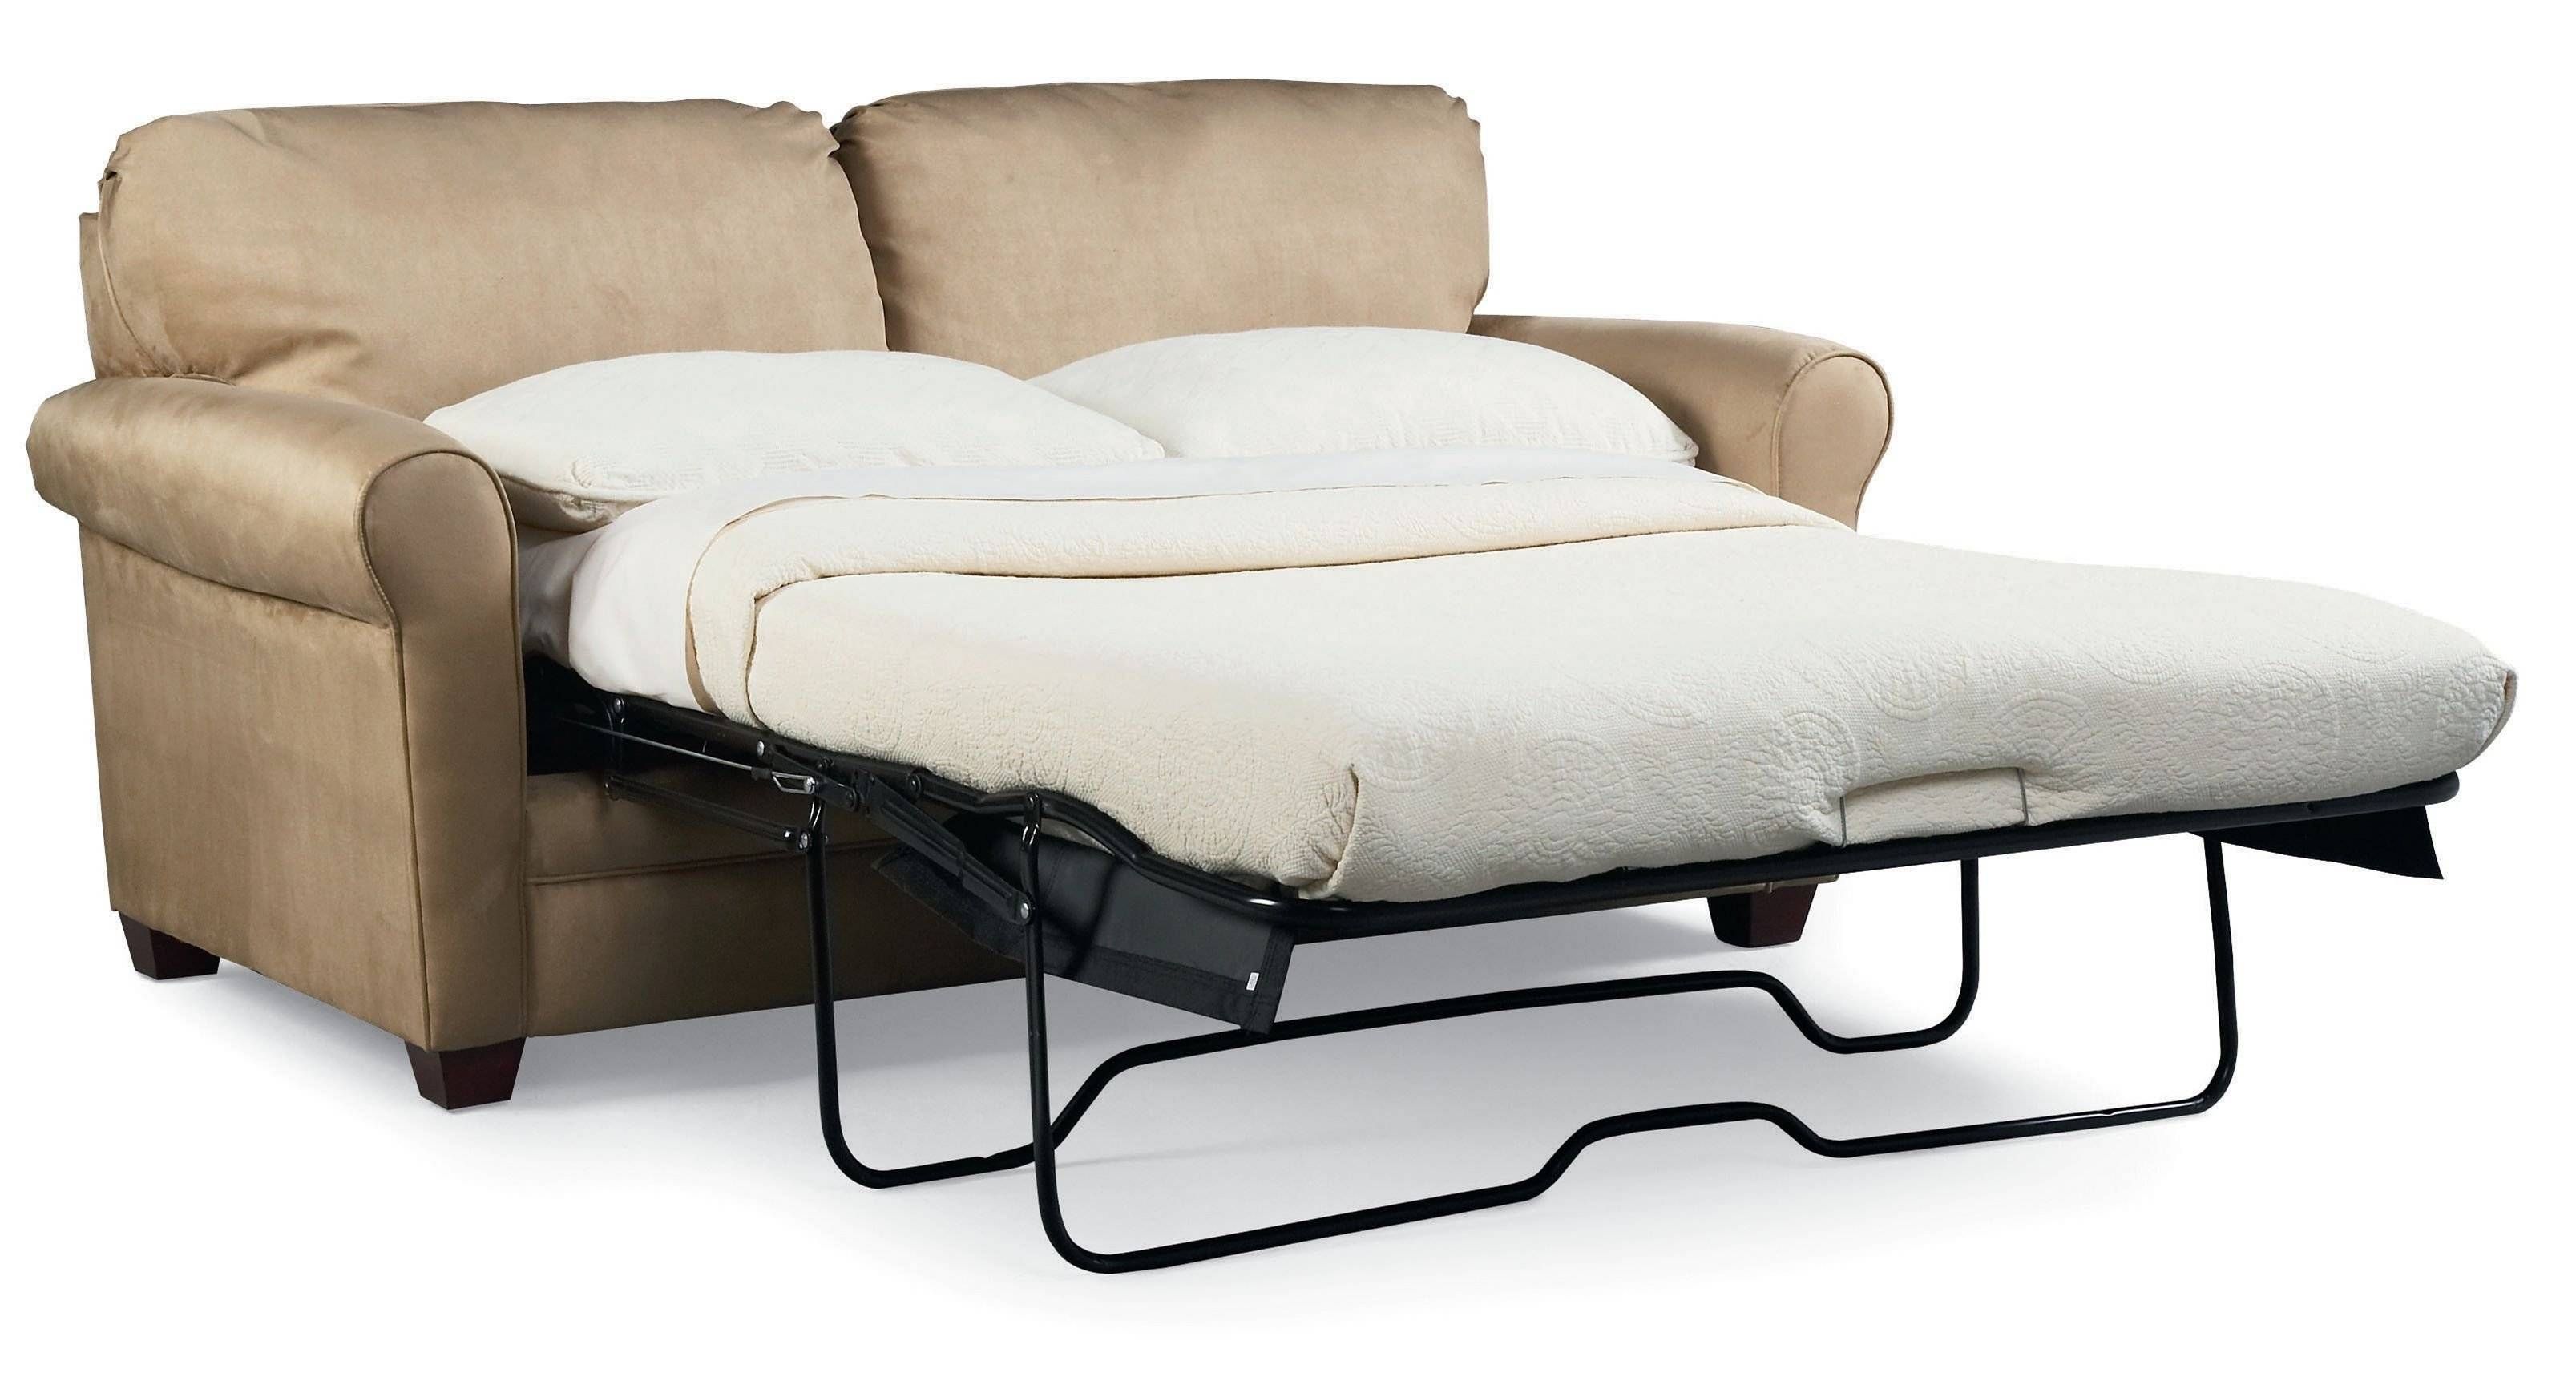 Furniture: Simmons Sleeper Sofa With Double Seat For Home With Simmons Sofa Beds (View 12 of 15)